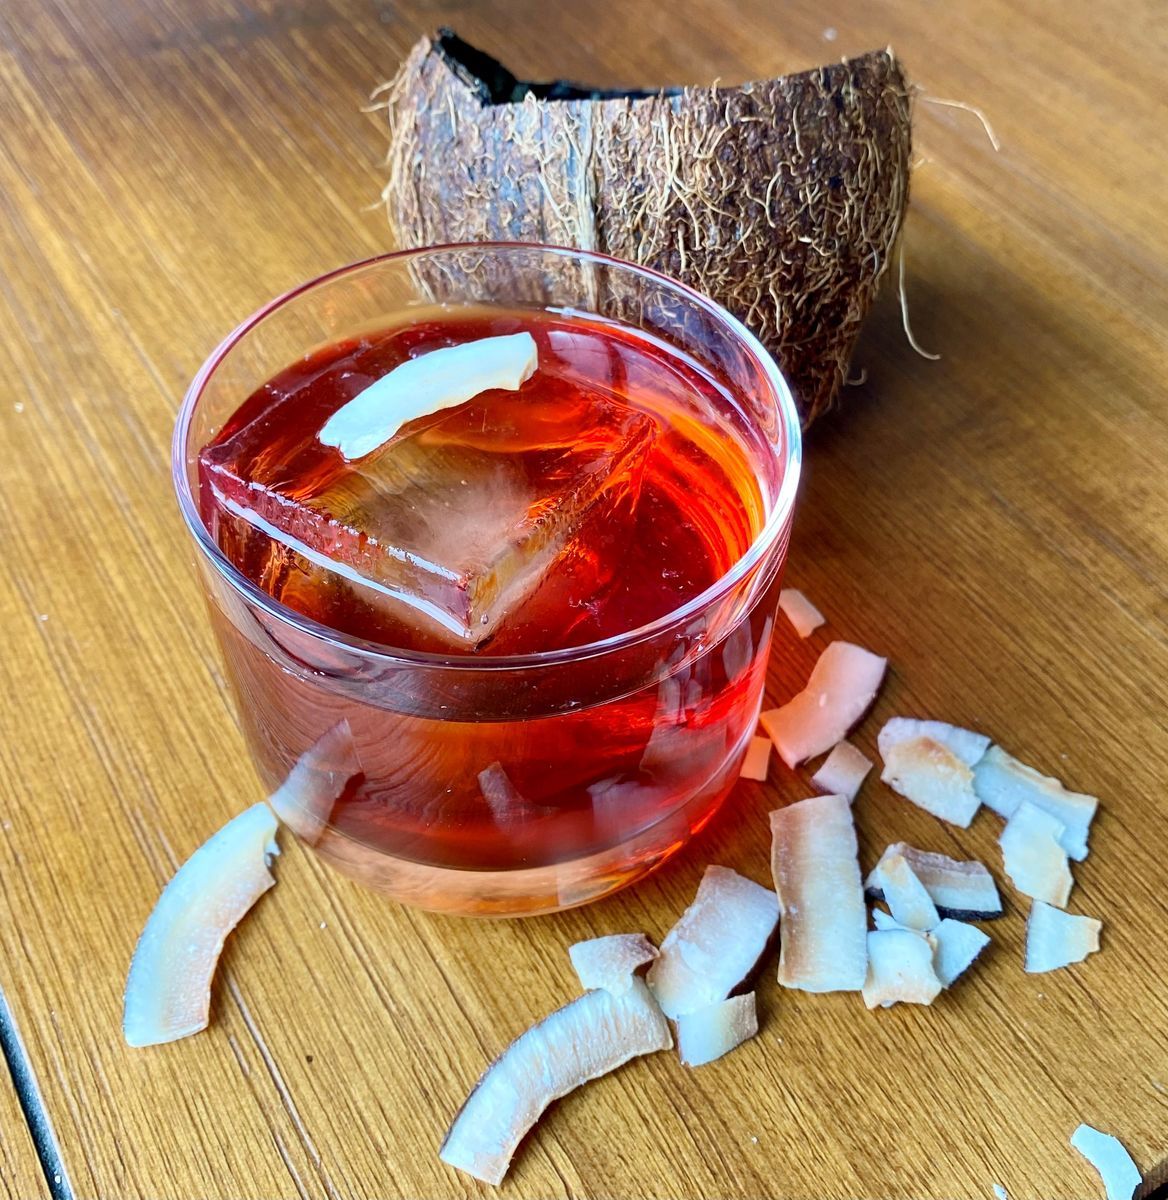 This is a negroni with a tropical twist. In equal parts, the Campari overpowers the coconut flavour, so it is important to increase the volume of coconut rum. The first taste is classic negroni and then you get the subtle coconut aftertaste. 